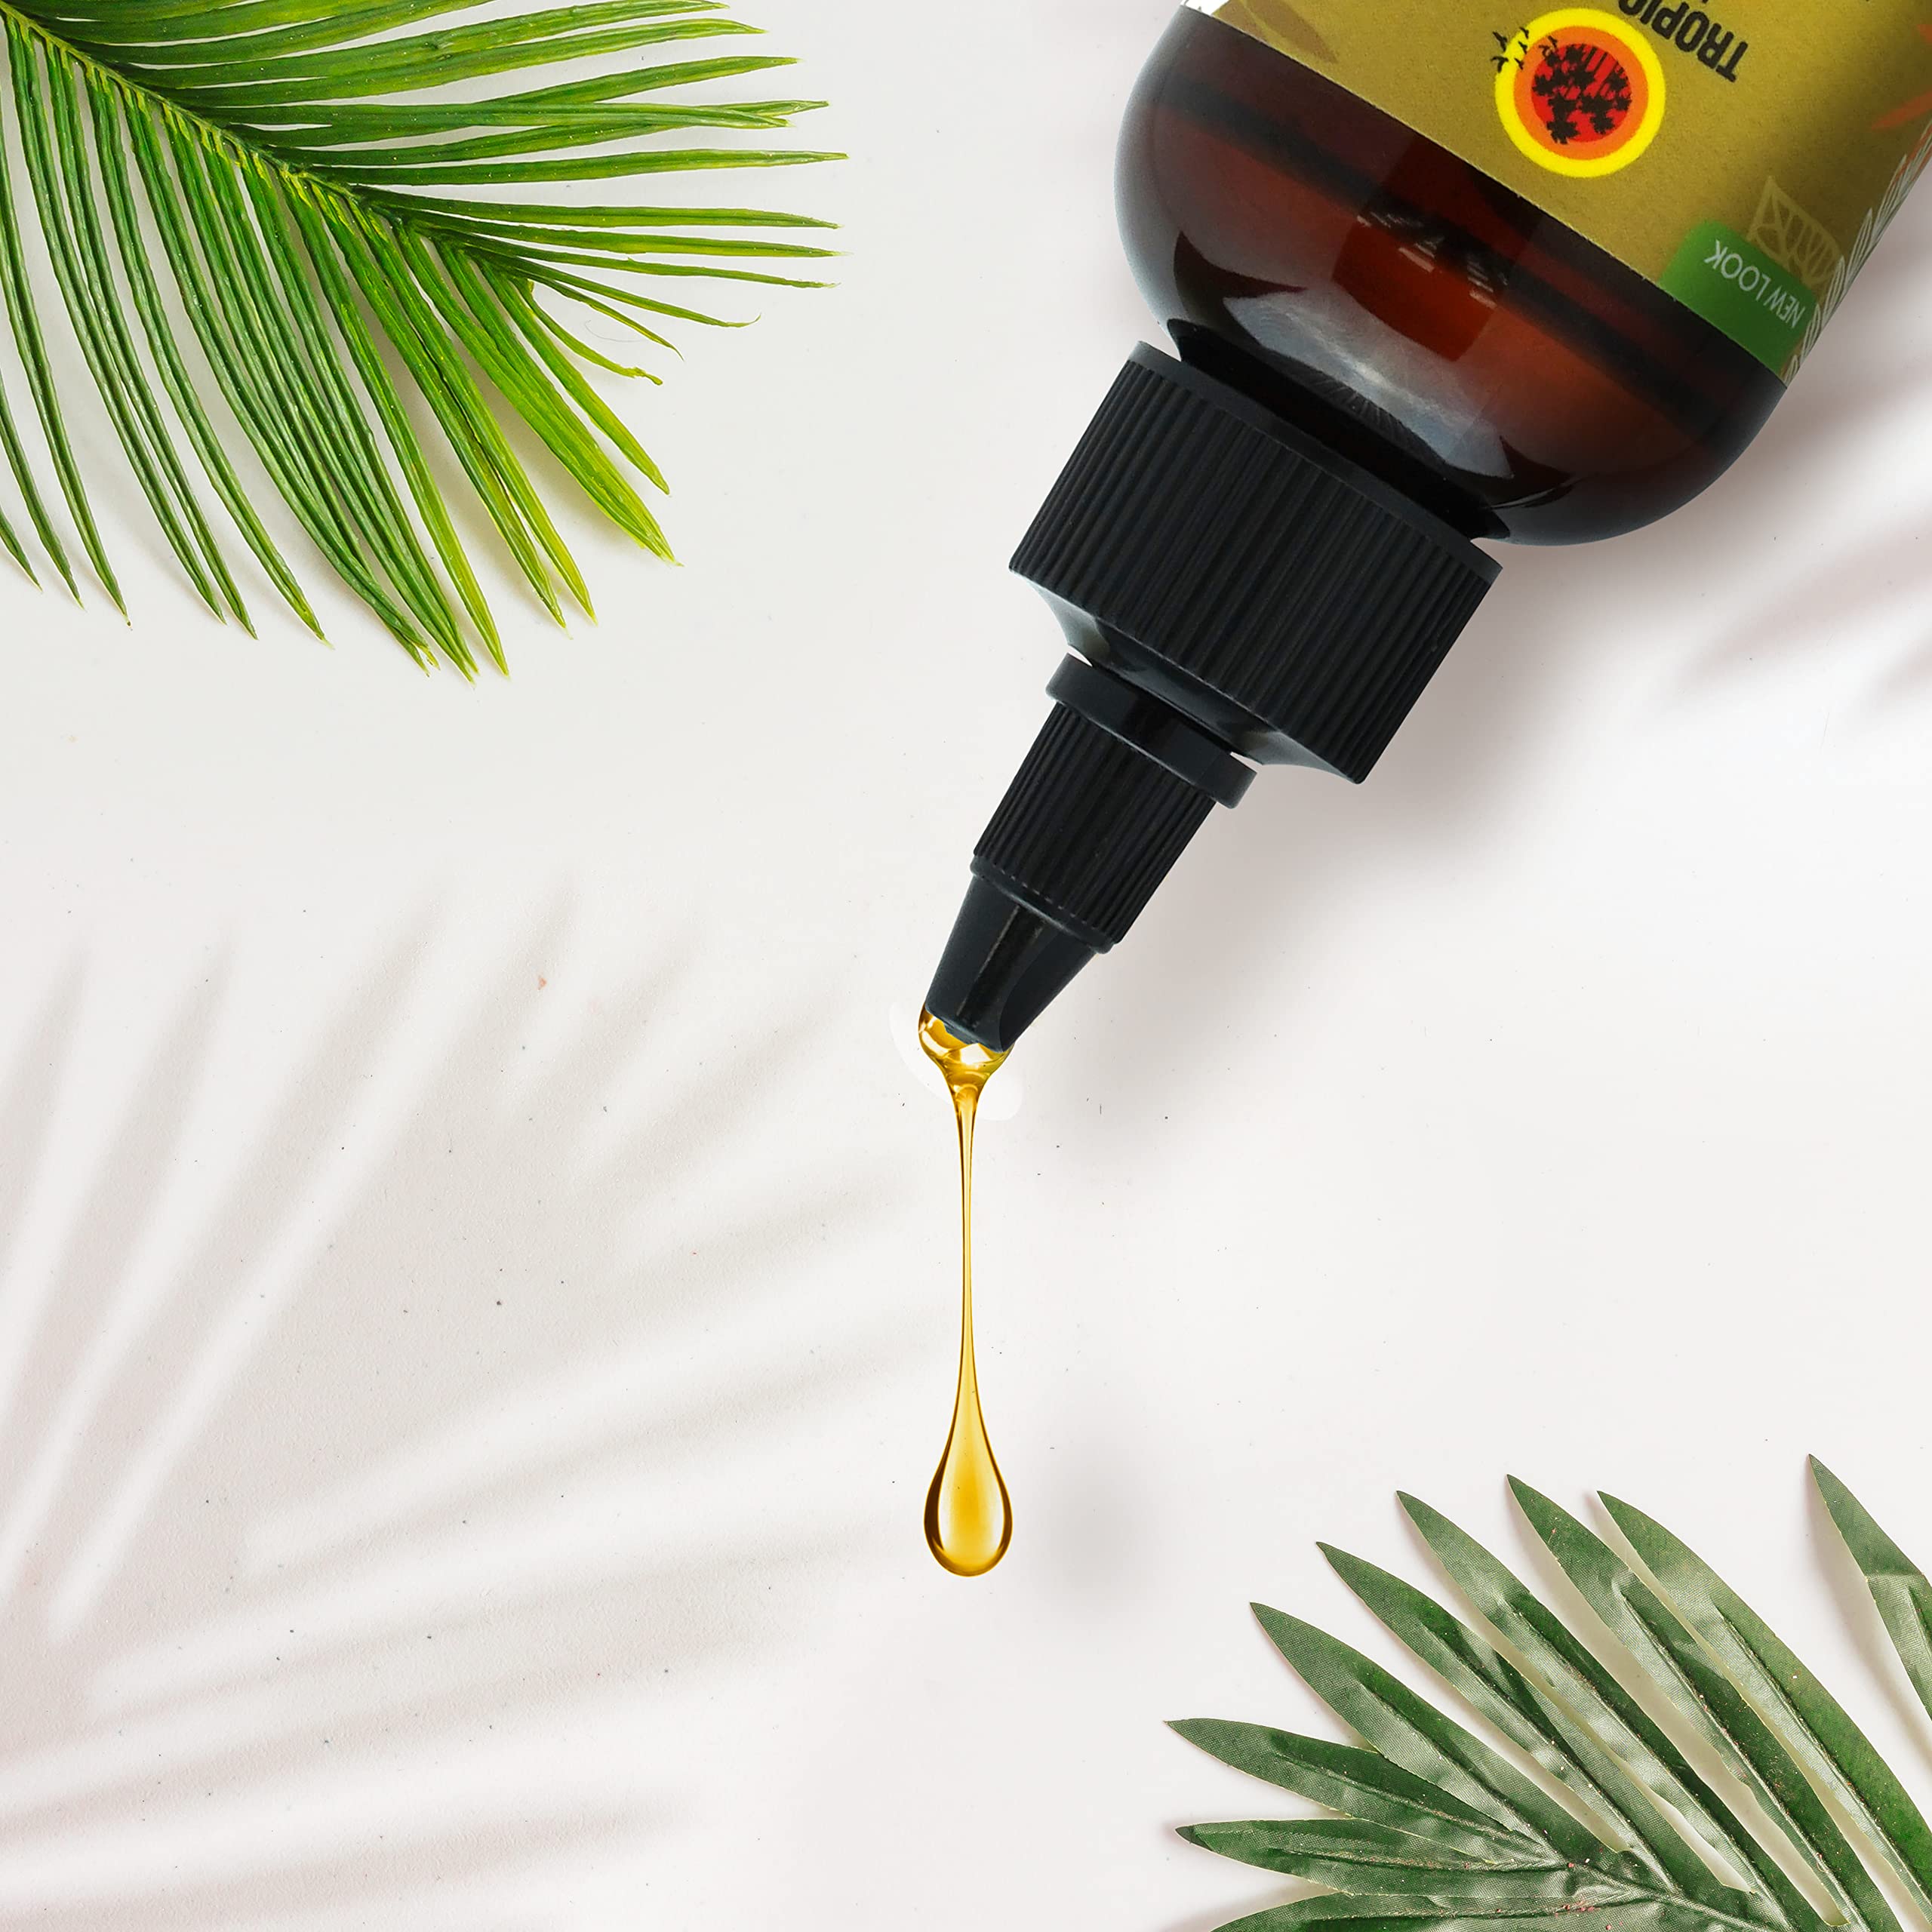 Tropic Isle Living Jamaican Black Castor Oil - Plastic PET Bottle 8oz | For Hair Growth Oil, Skin Conditioning, Eyebrows & Eyelashes, Scalp and Nail Care